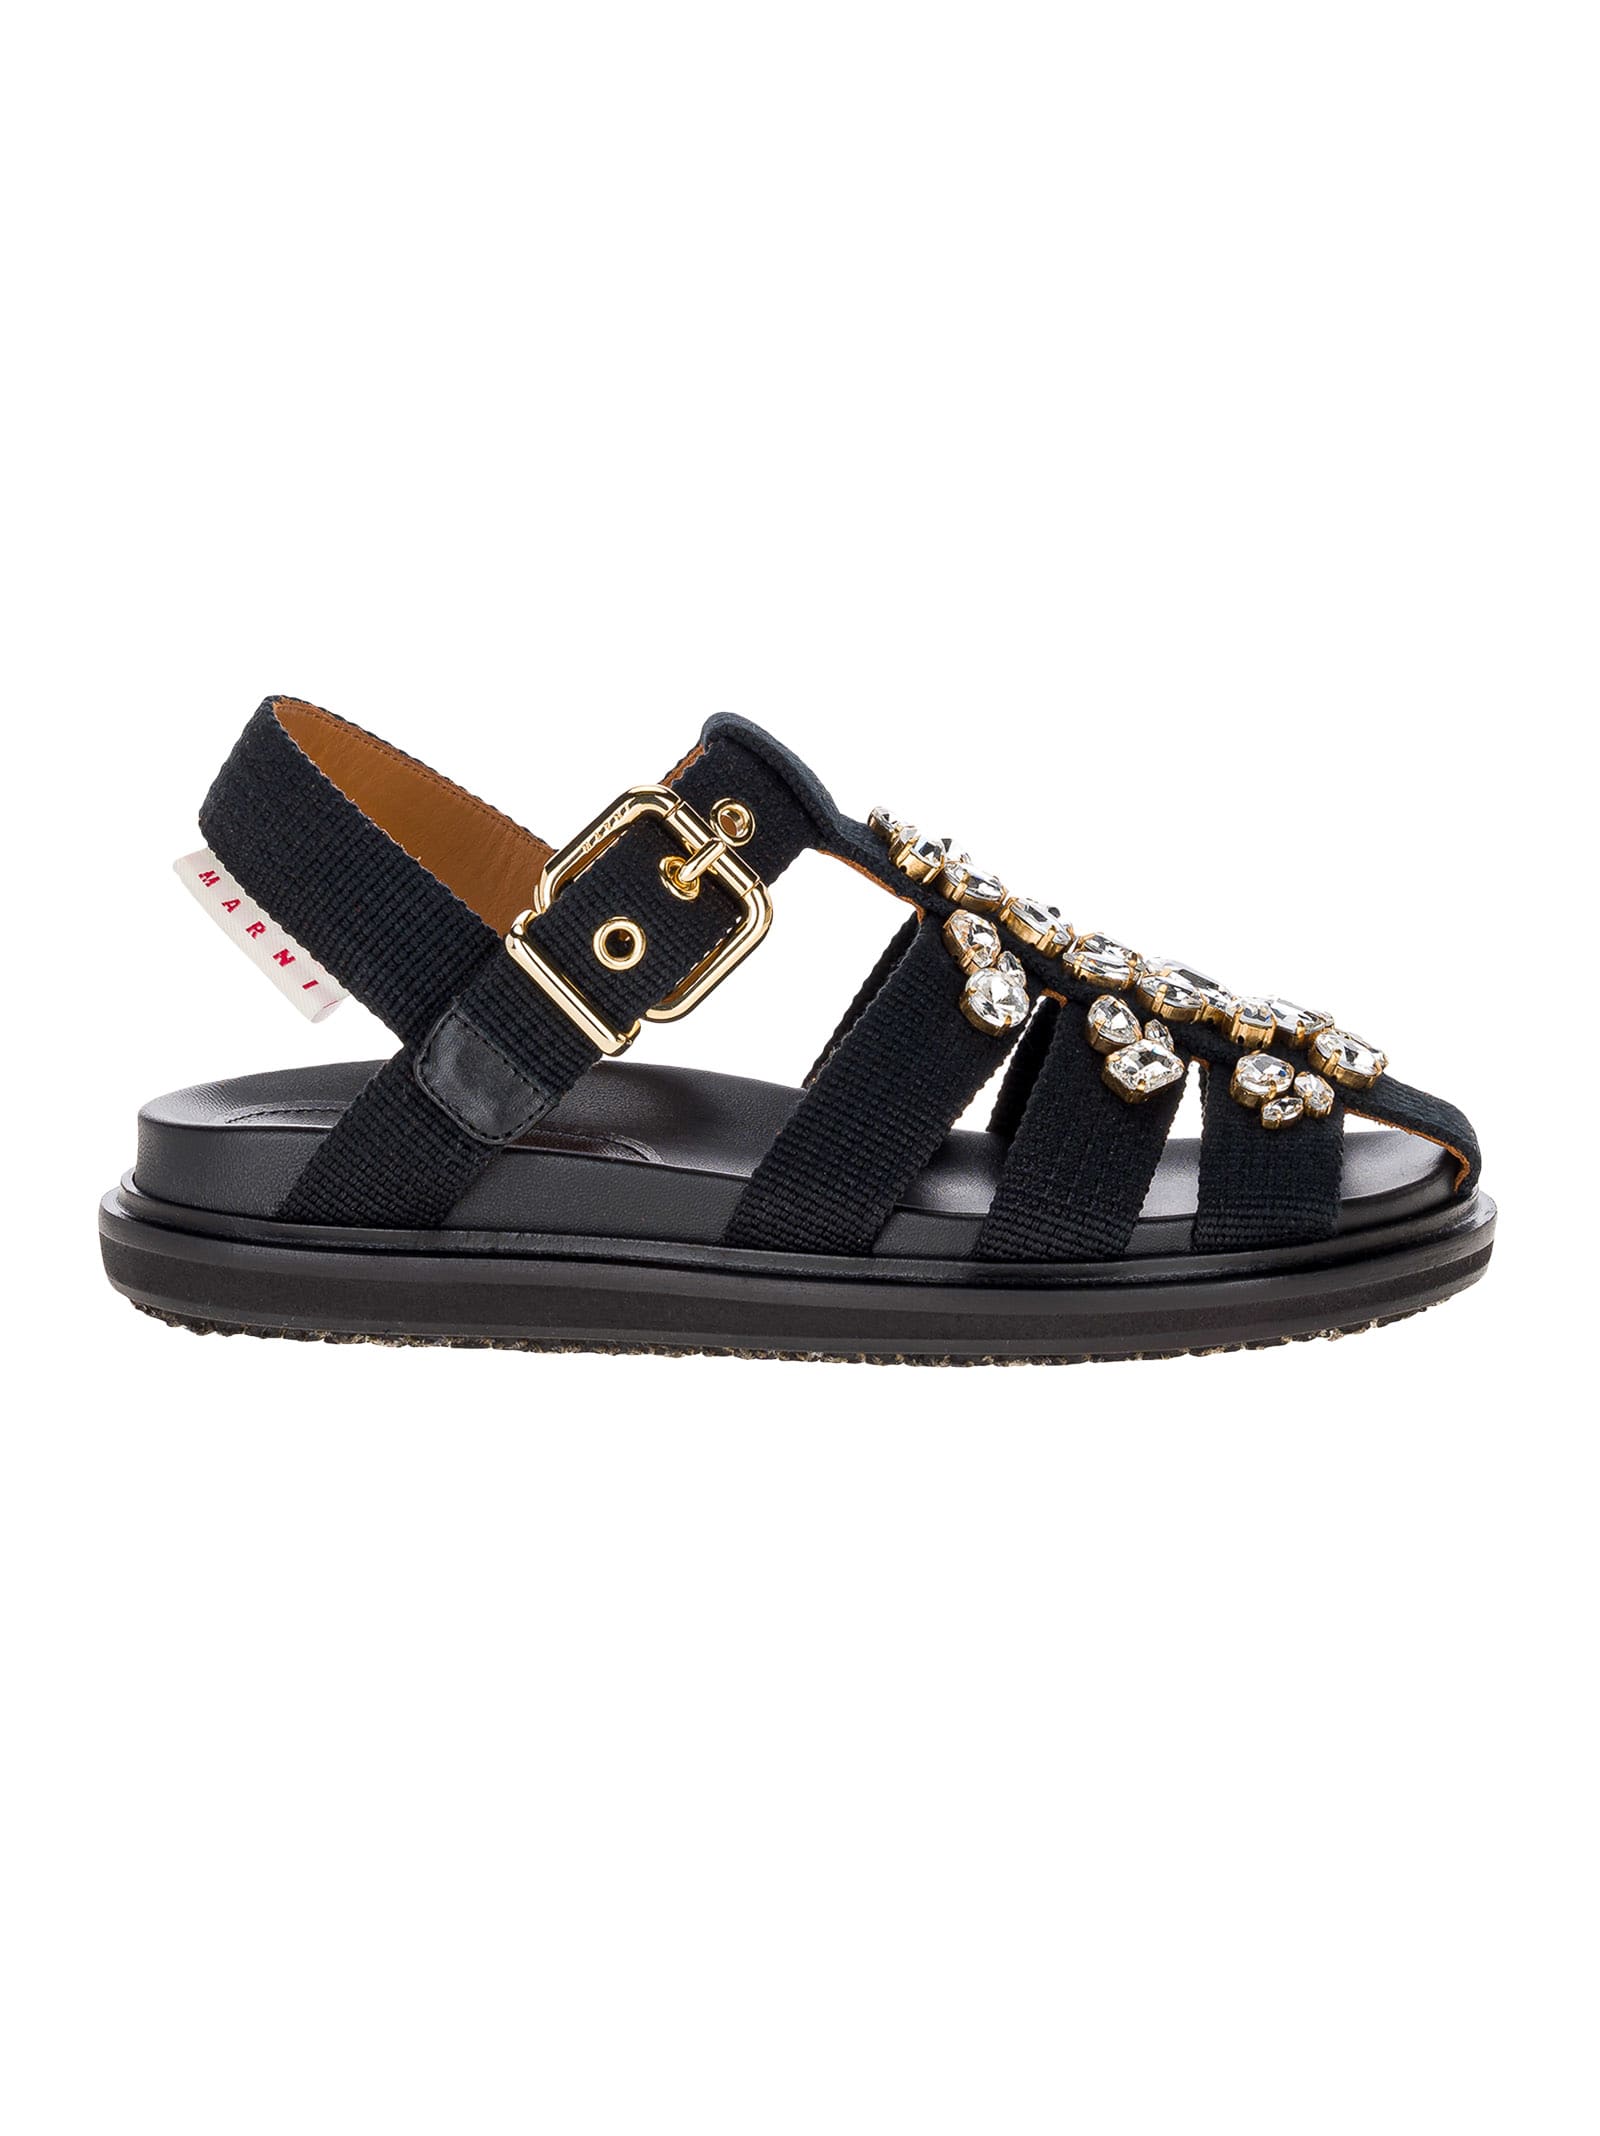 Buy Marni Embellished Fisherman Sandals online, shop Marni shoes with free shipping